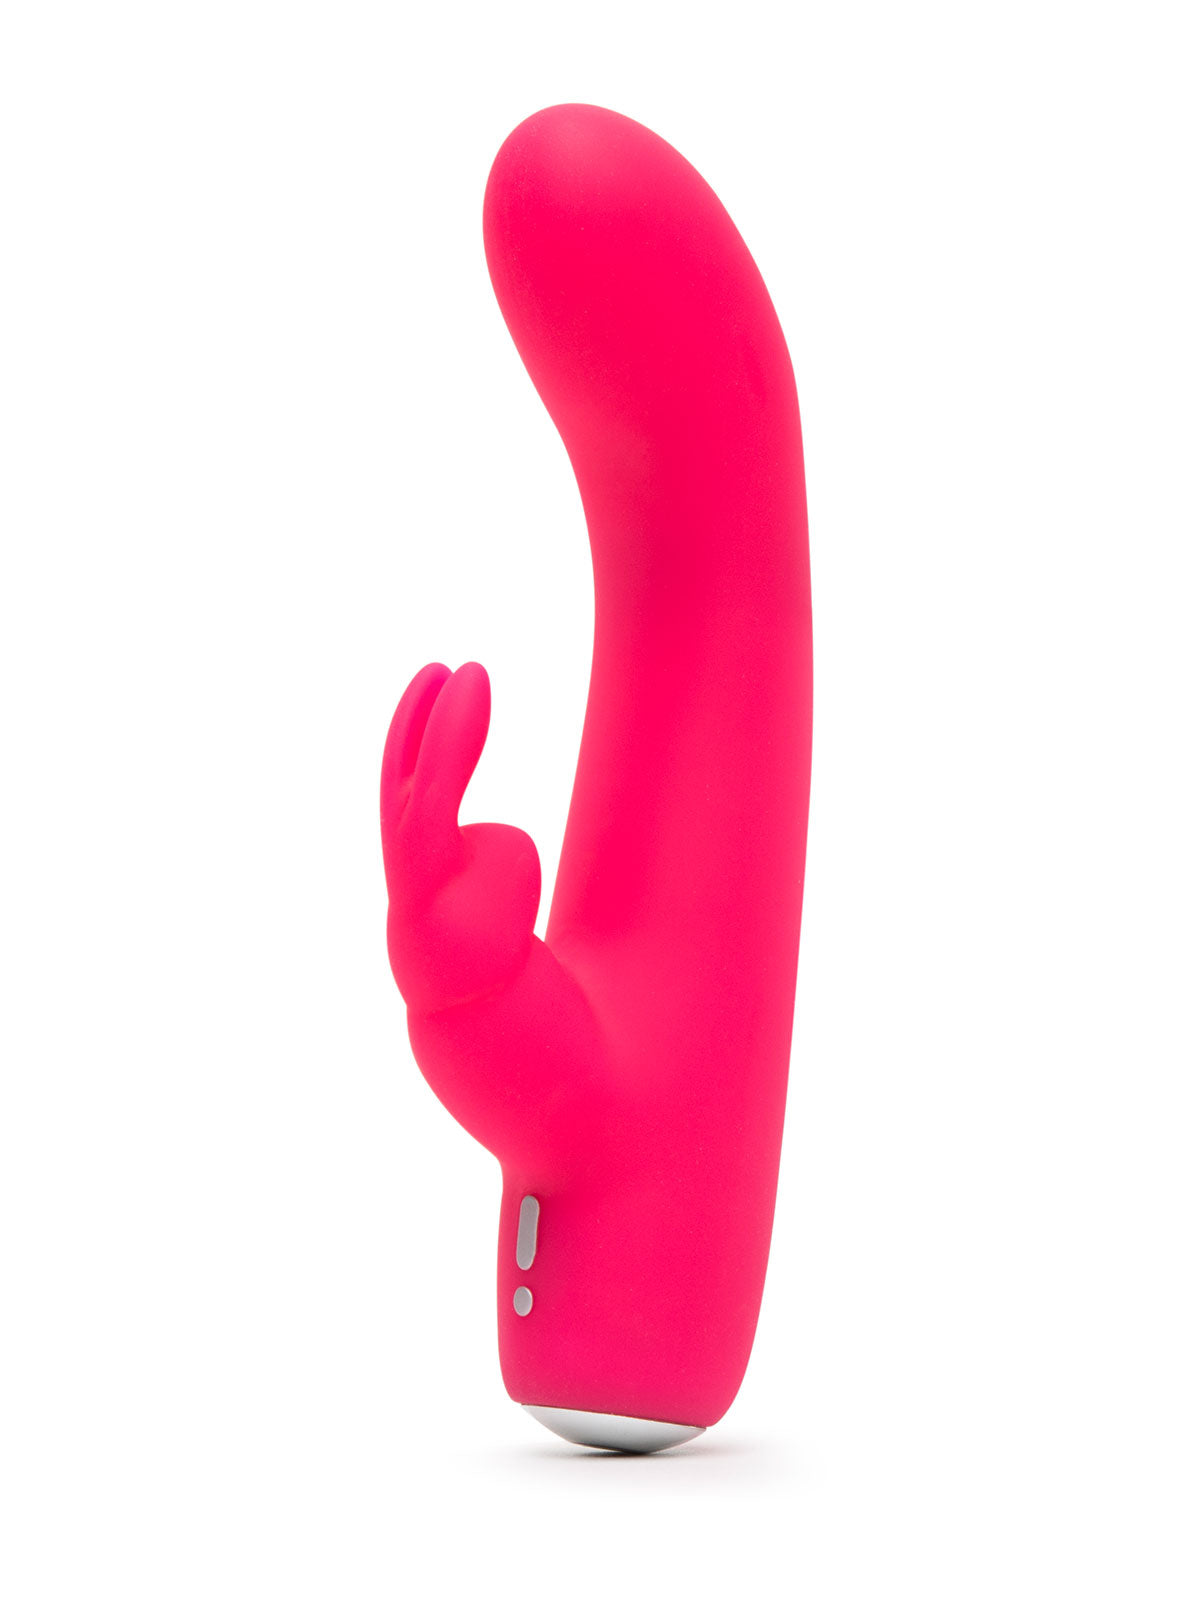 Pink Mini Vibrator by Happy Rabbit Side View